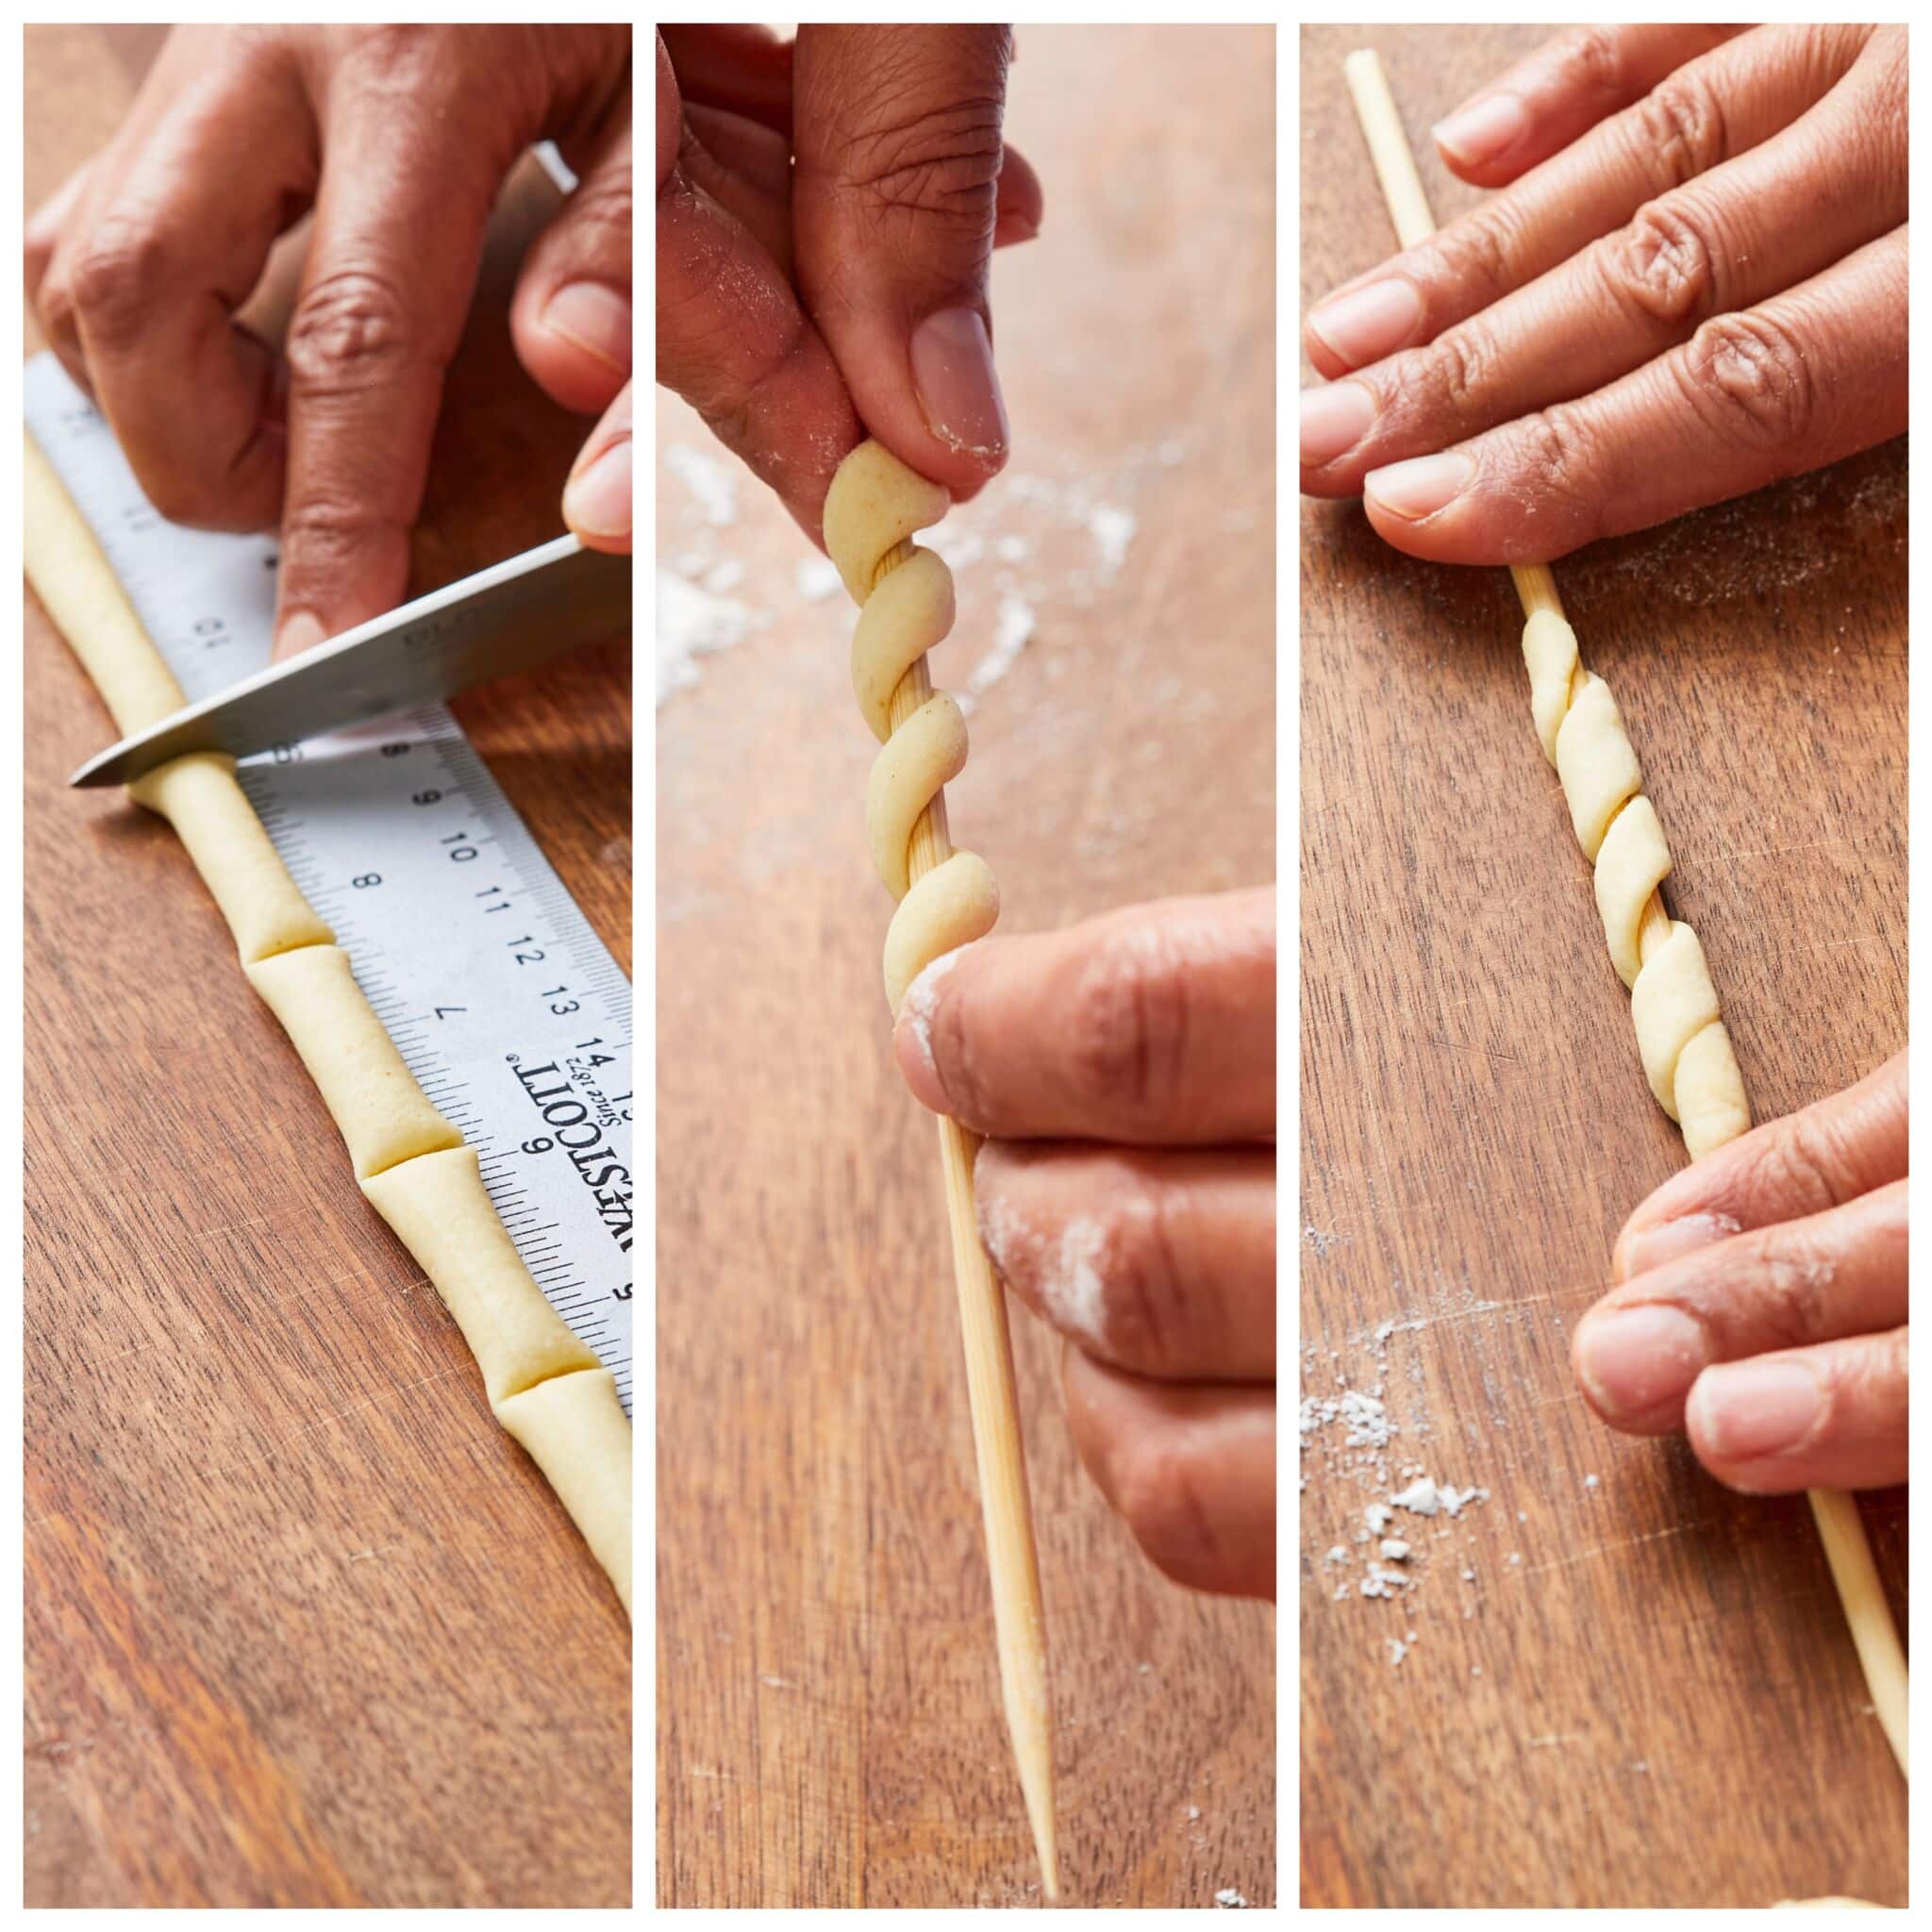 Step-by-step instruction on how to make Busiate pasta: roll the dough into a very thin strip about ¼ inch (6 mm) thick. Cut the rope into 3-inch (9 cm) pieces. Working with one piece of dough at a time, twist the dough around a wooden skewer, and then roll the skewer to flatten the coil.